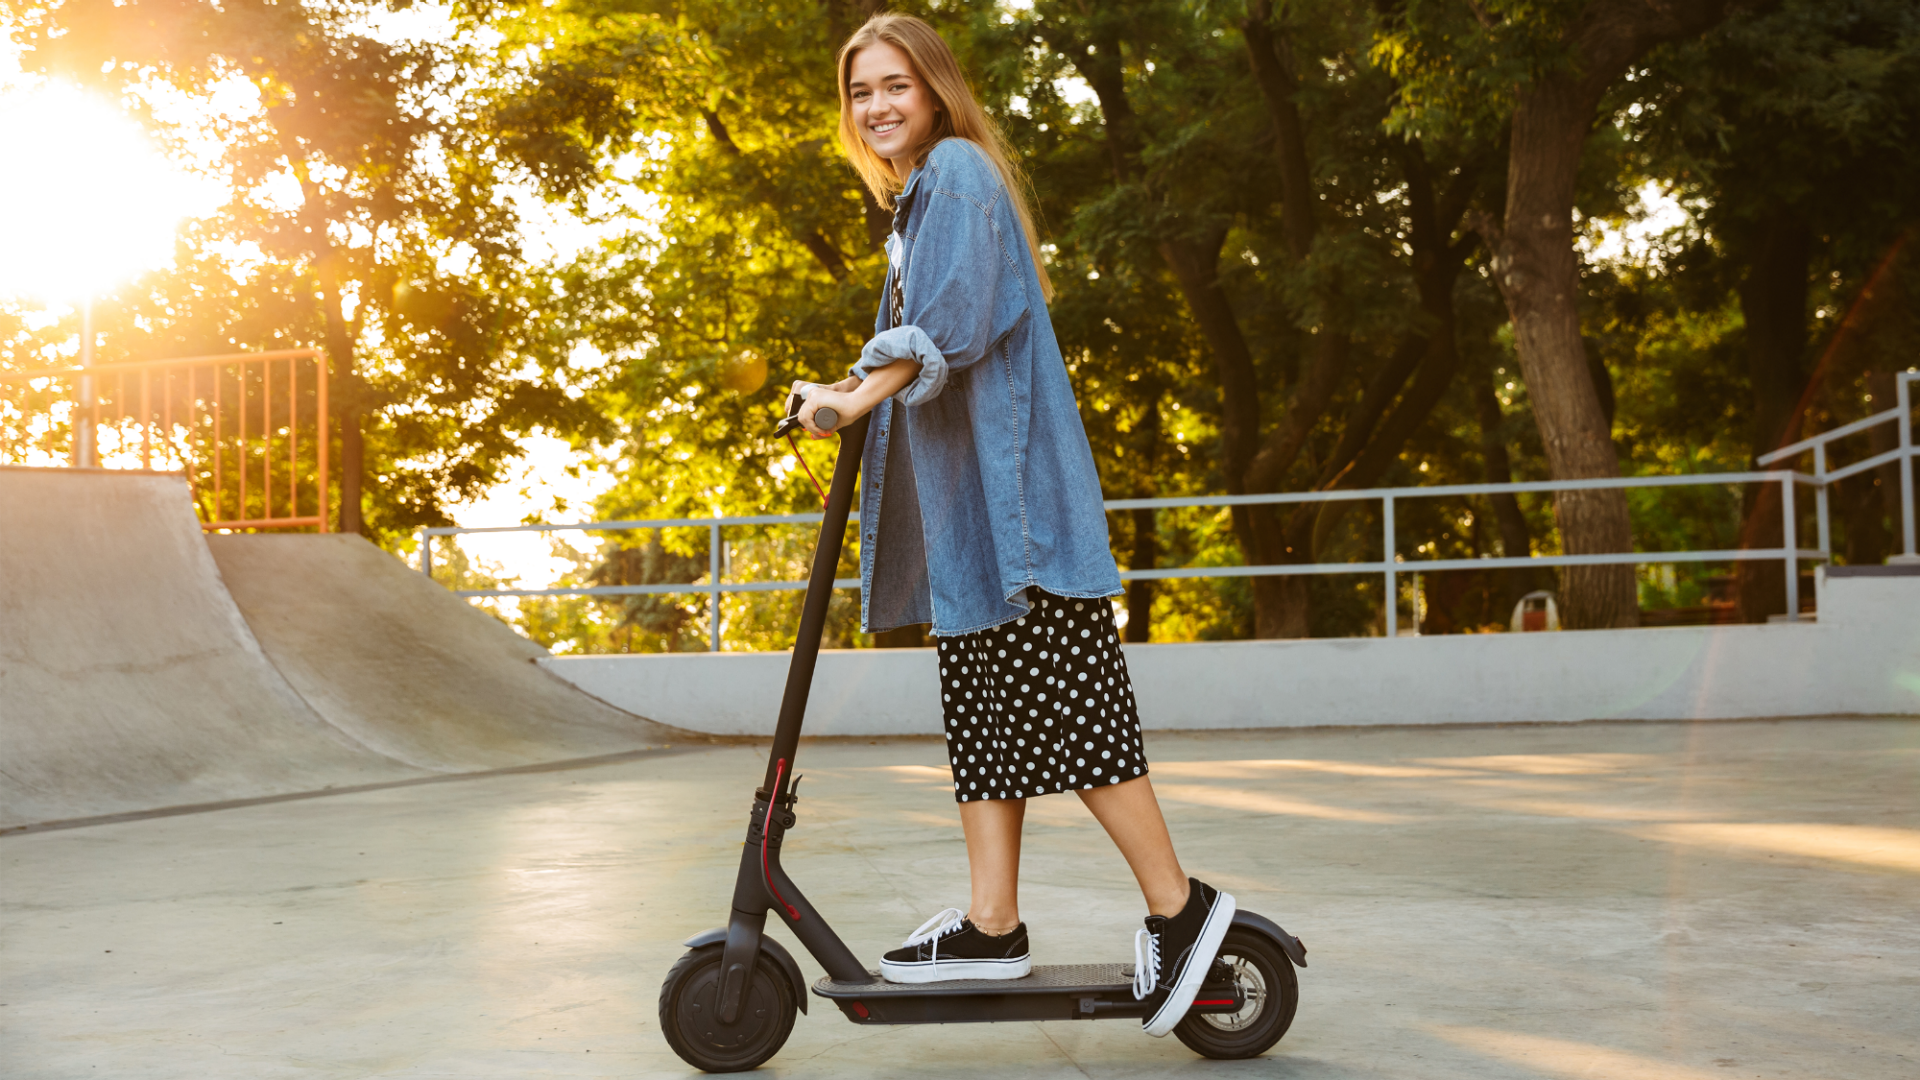 Young woman on an electric scooter.